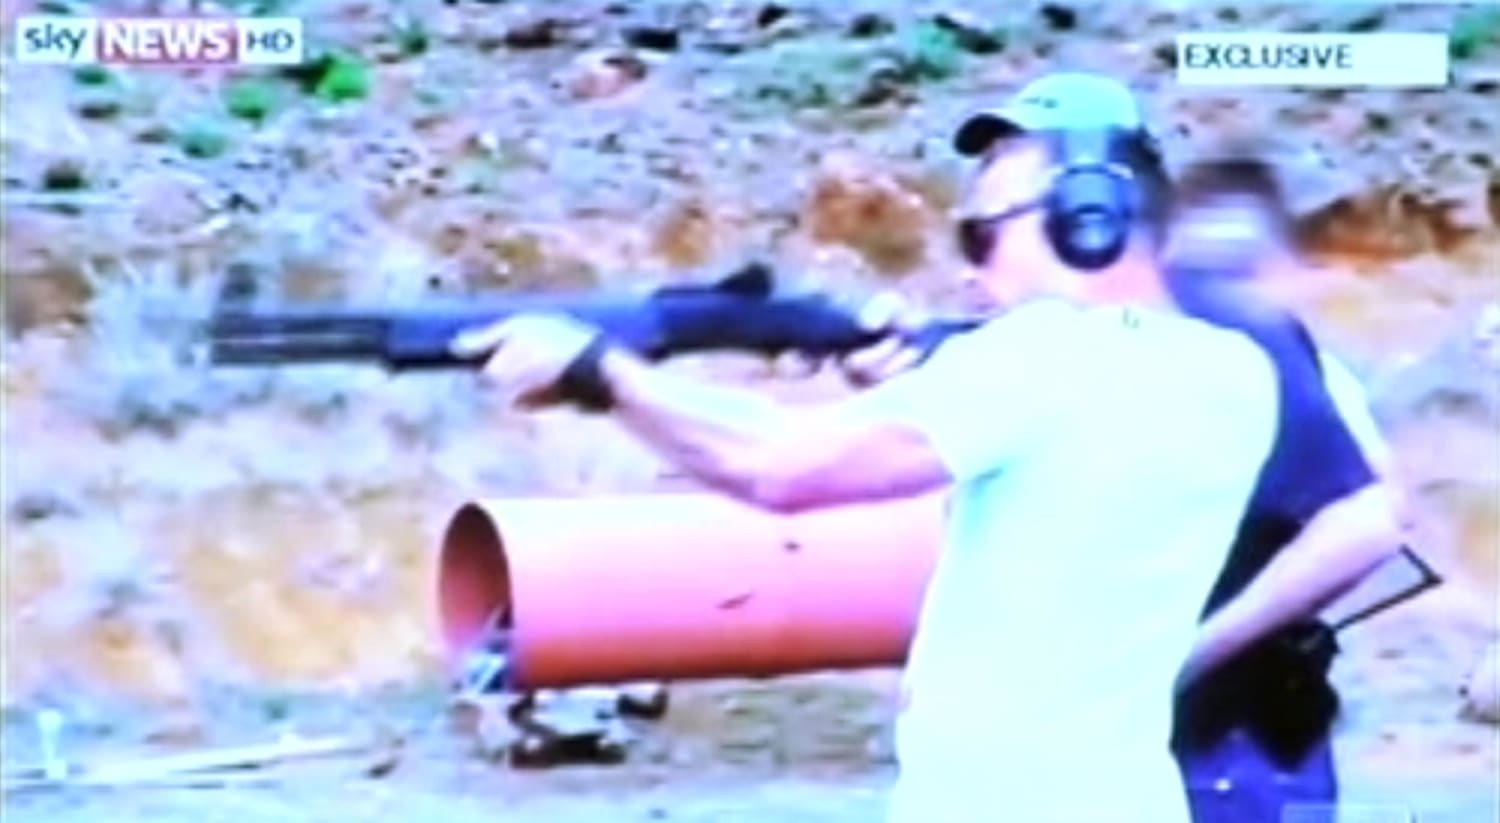 Image: Oscar Pistorius fires a weapon at a shooting range in a video shown to the court during his murder trial in Pretoria.